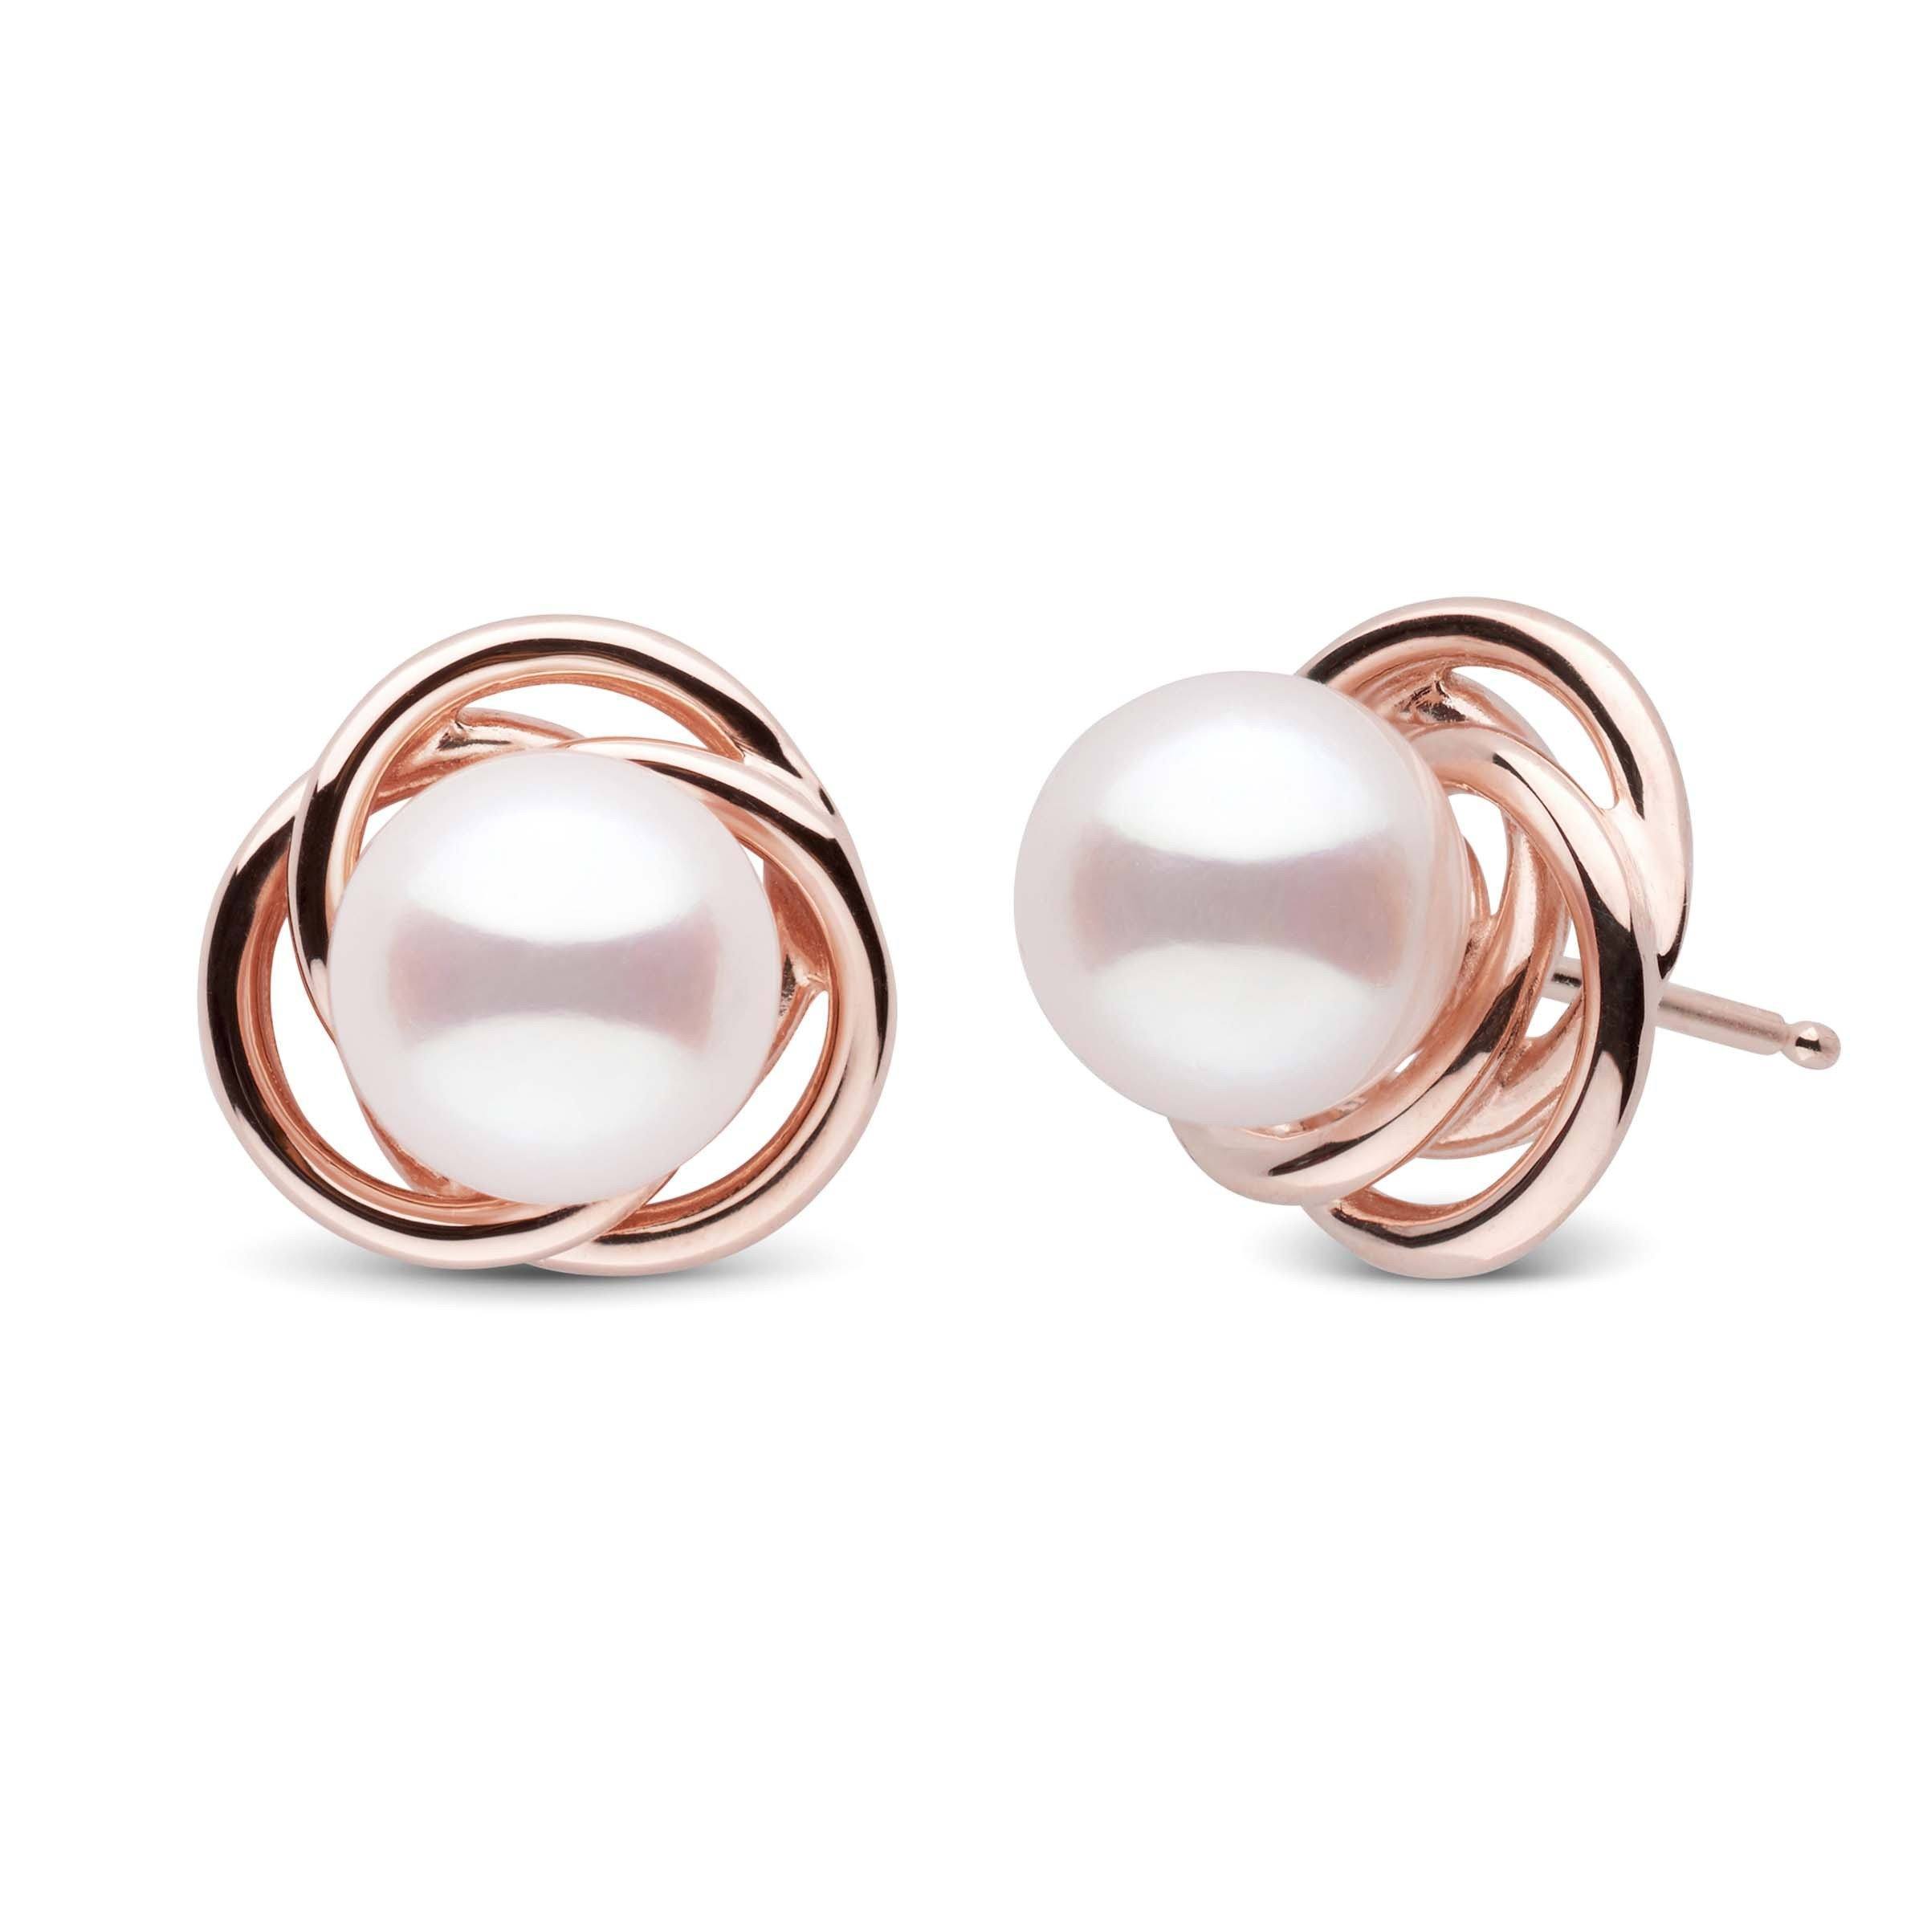 Starlight Collection 7.0-7.5 mm White Akoya Pearl & Diamond Stud Earrings 14K Yellow Gold by Pearl Paradise